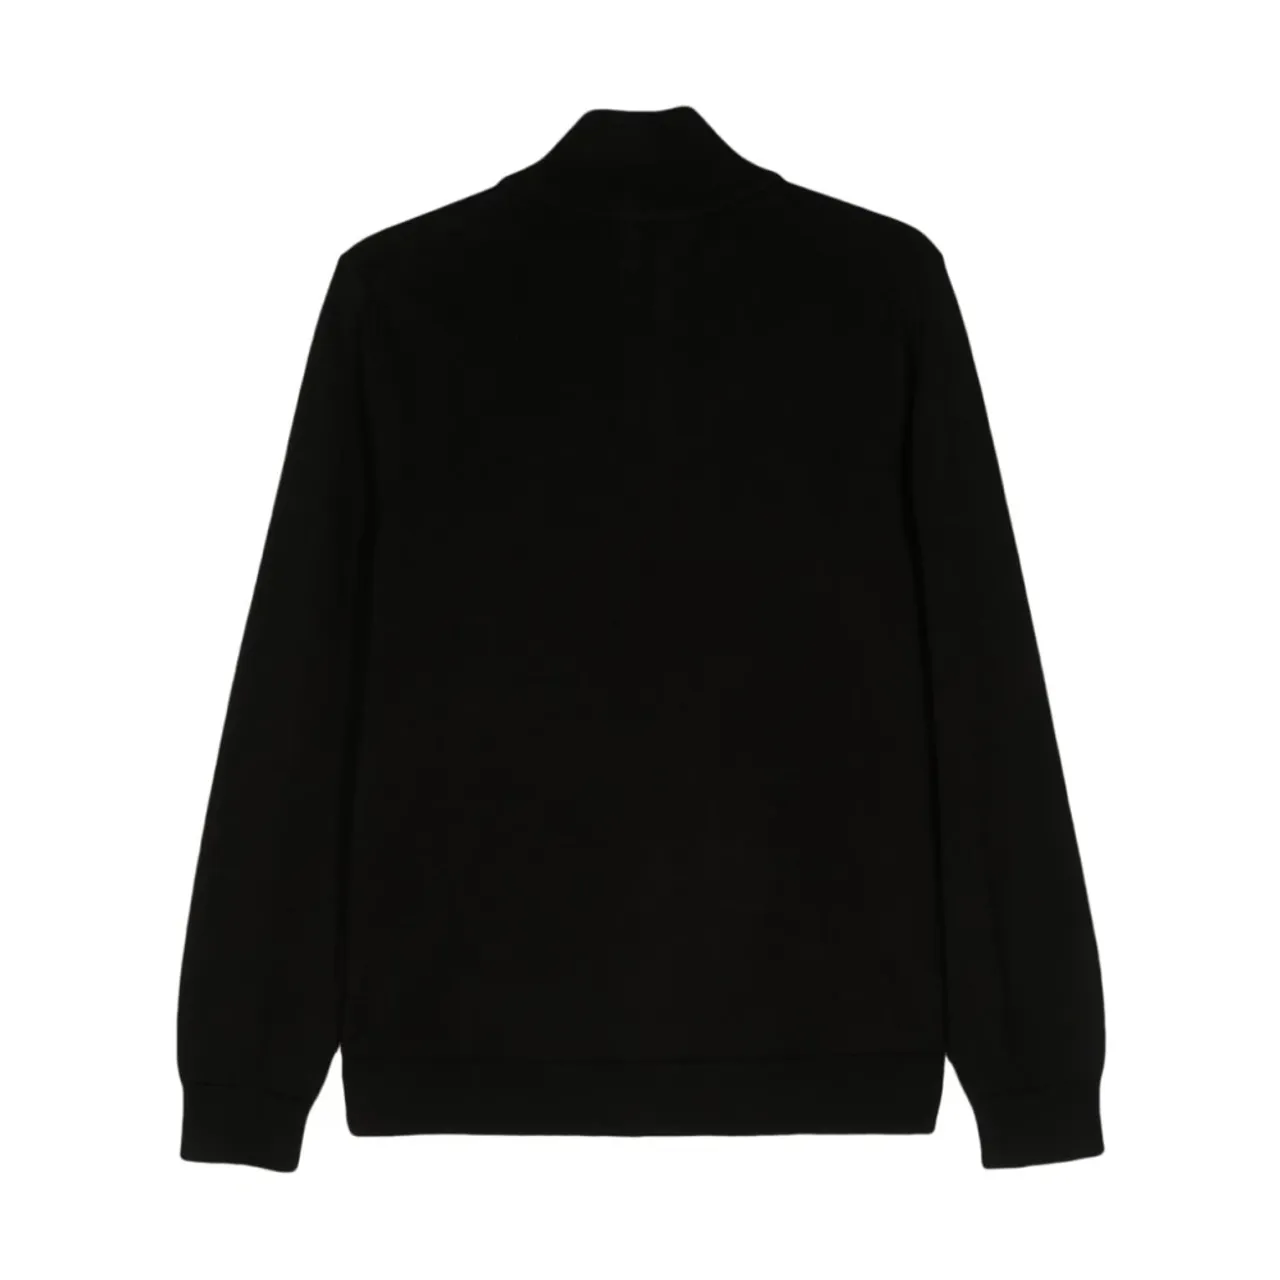 PS By Paul Smith , Black Cotton Sweater with Zebra Motif ,Black male, Sizes: